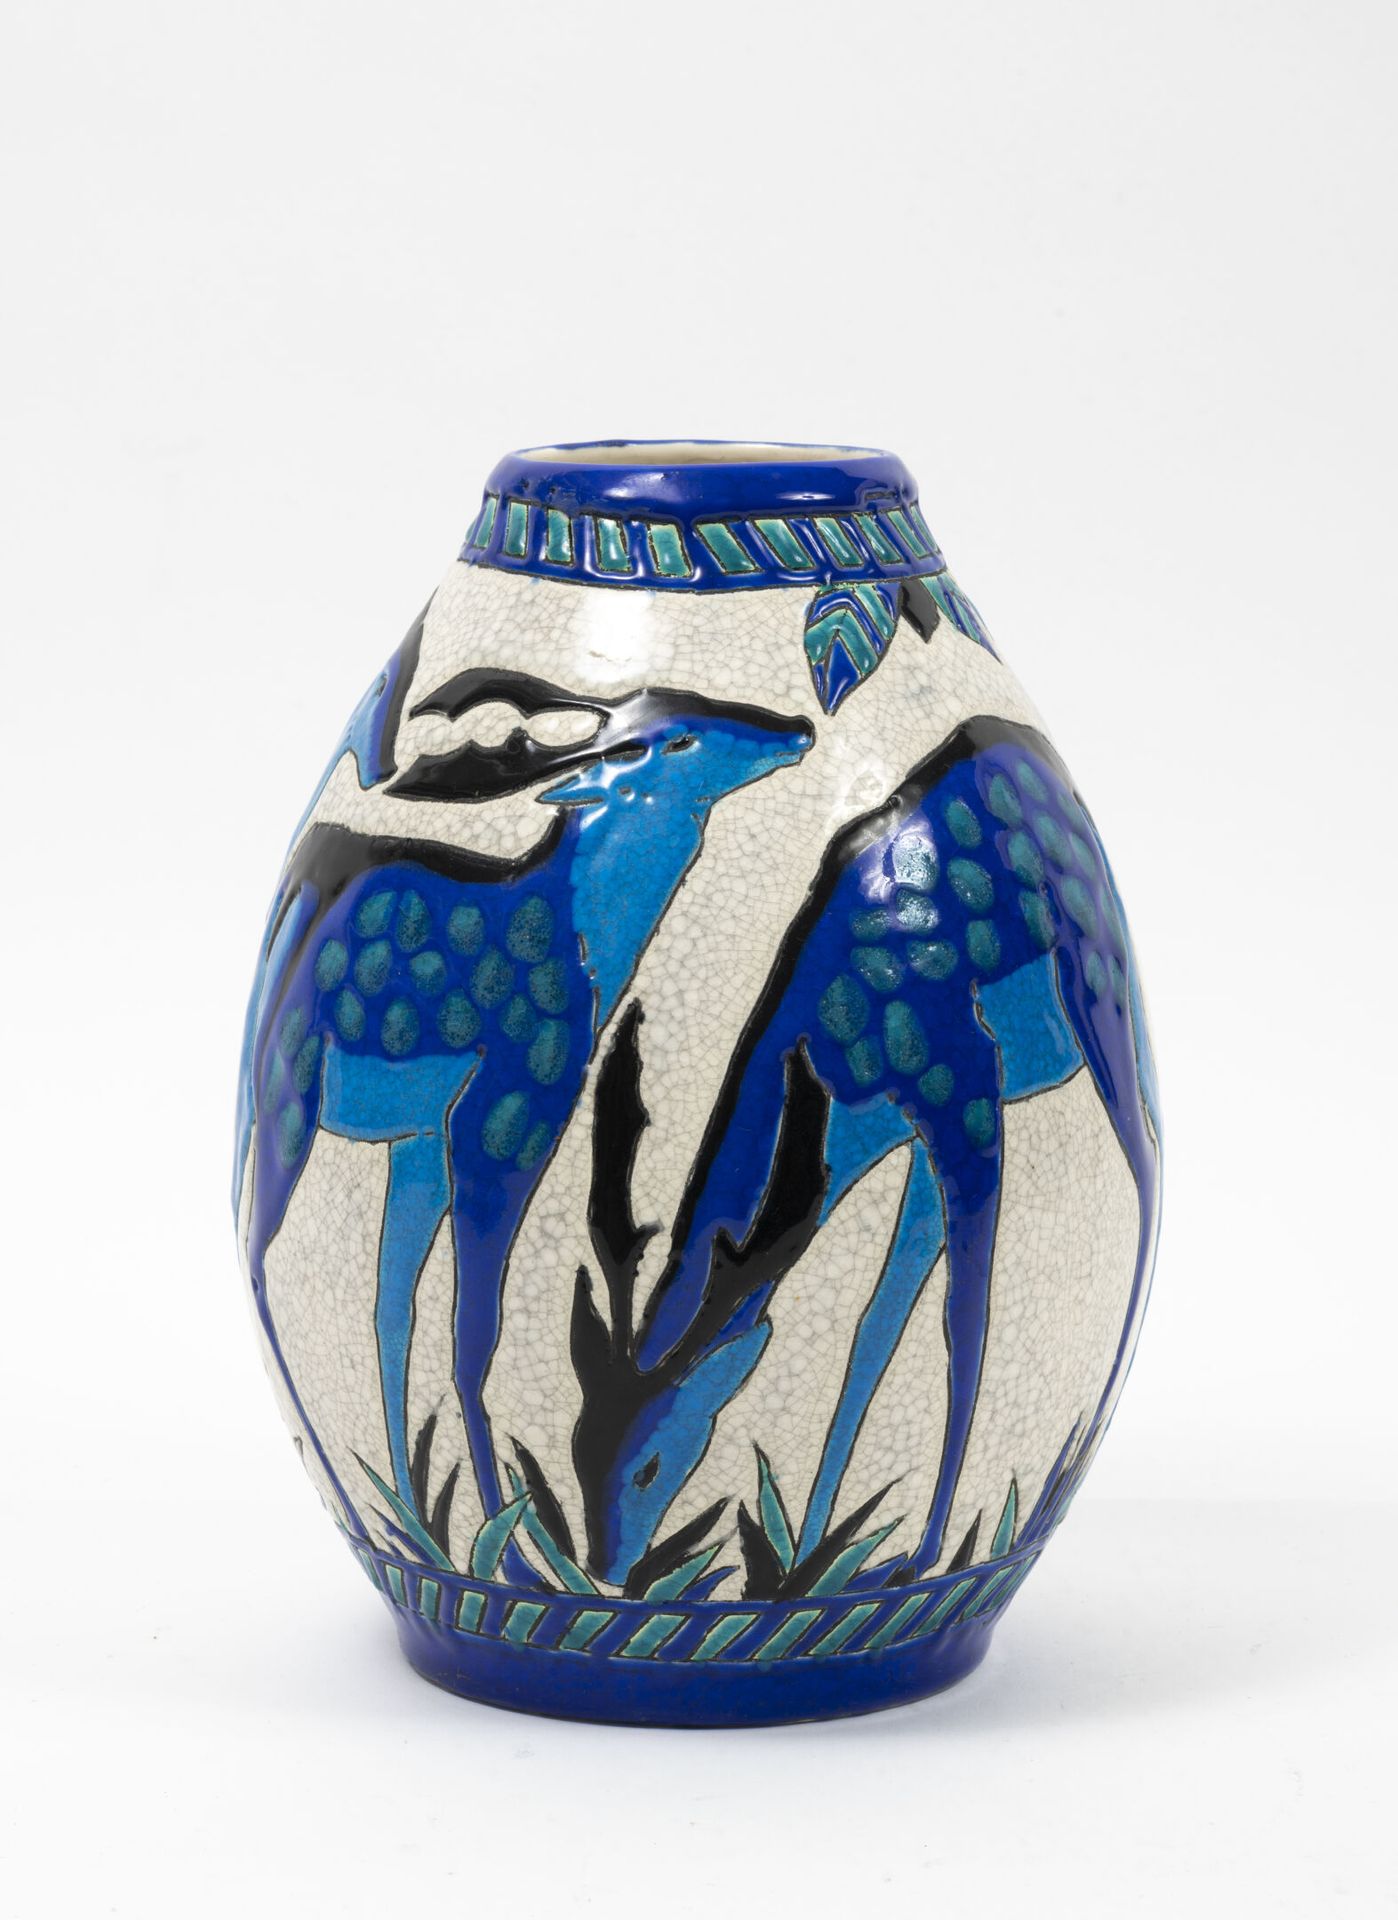 Charles CATTEAU (1880-1966) Ovoid vase.

In polychrome enamelled earthenware, wi&hellip;